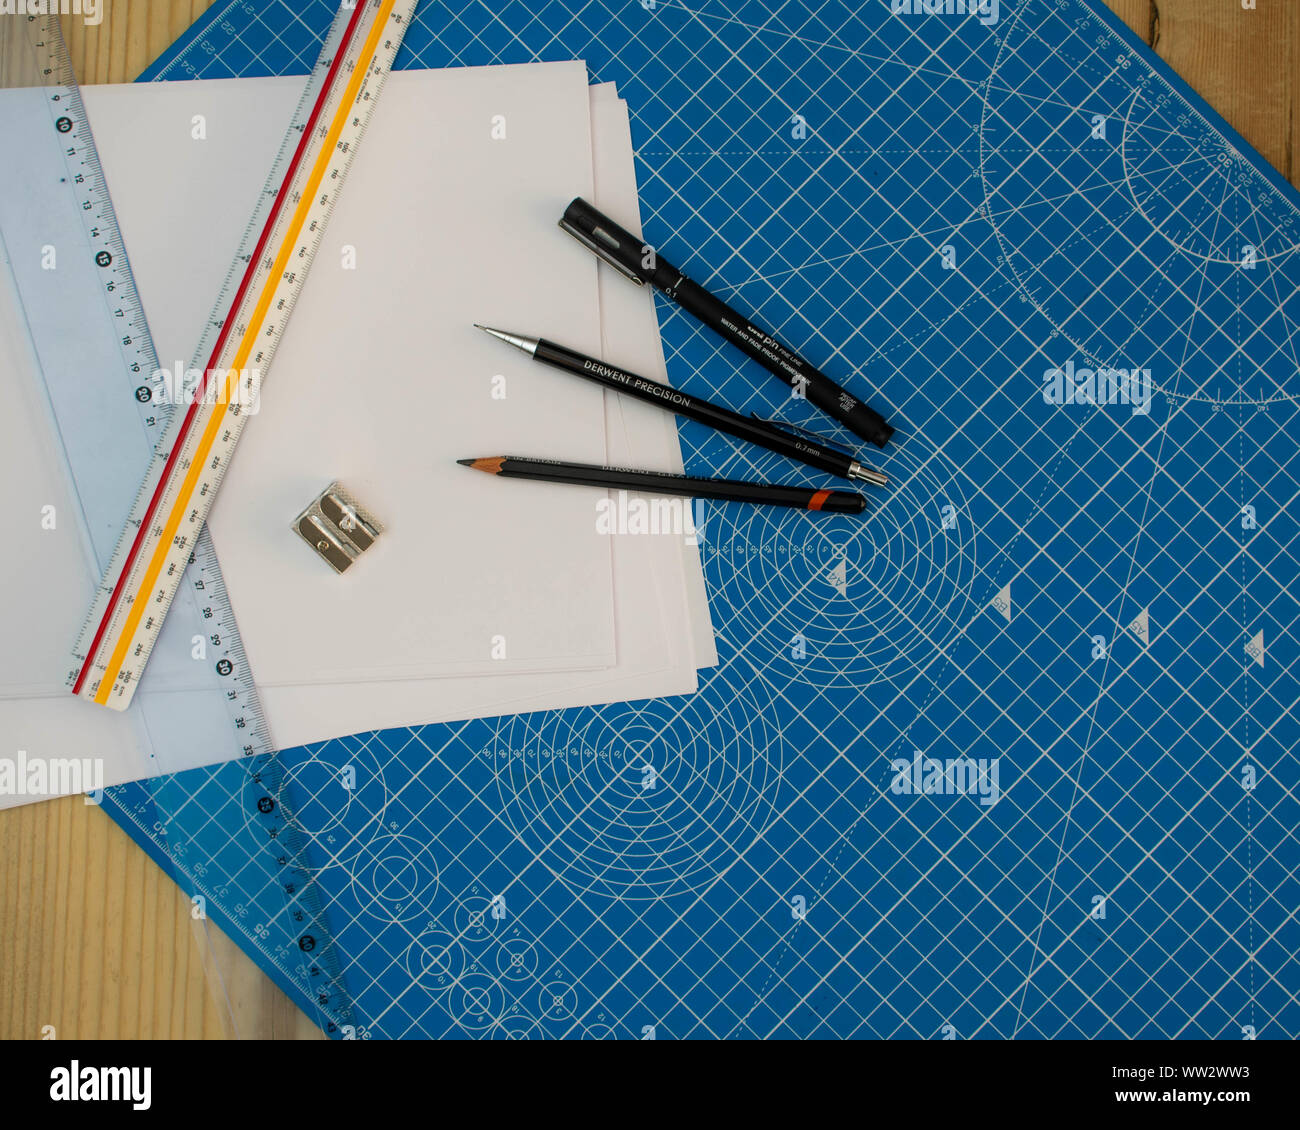 Technical drawing design work space in close up flat lay image Stock Photo